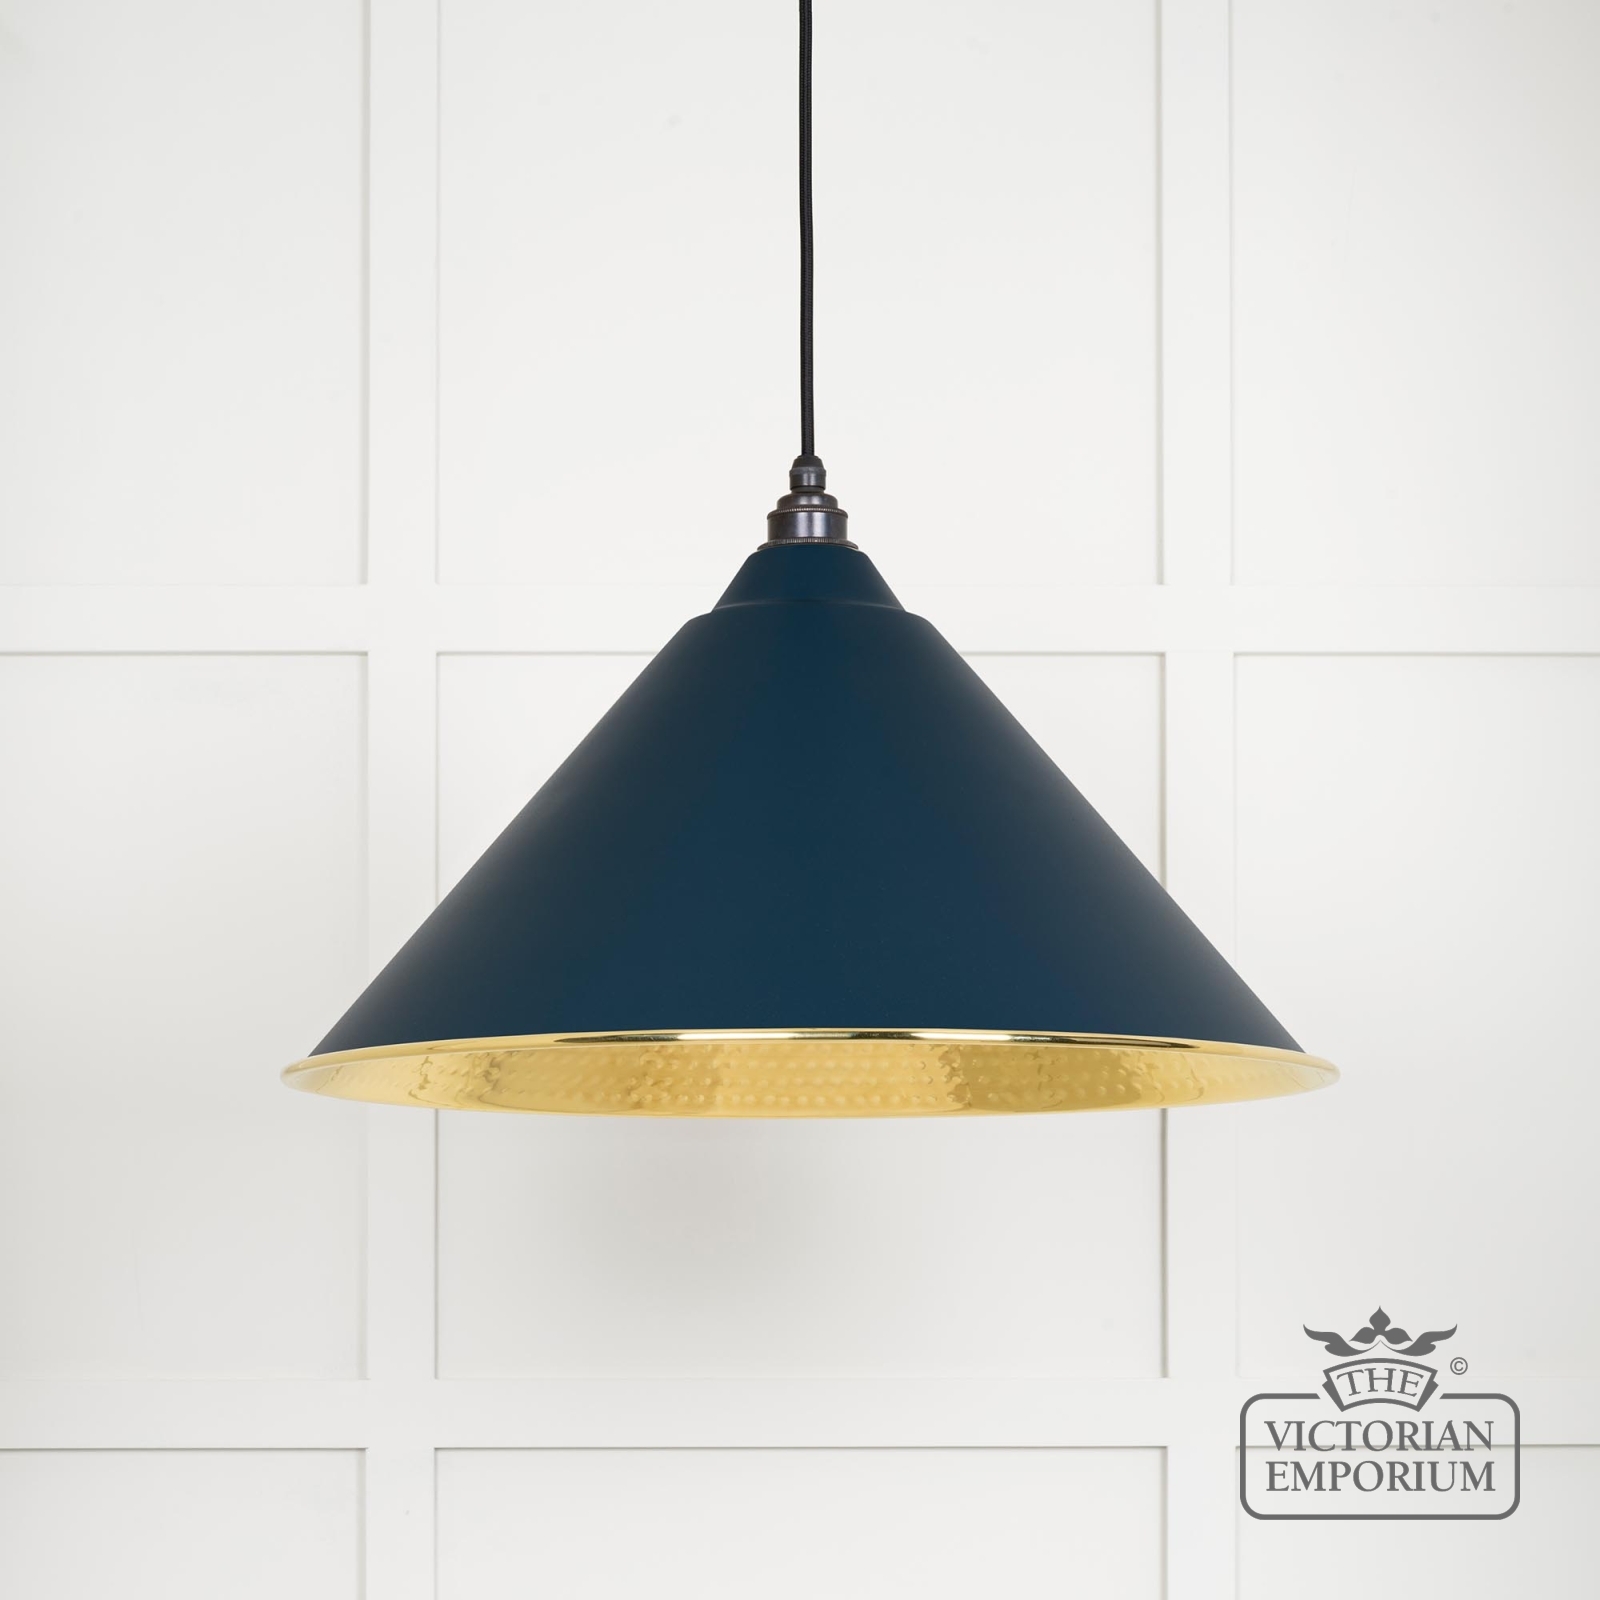 Hockliffe pendant light in Dusk and Hammered Brass